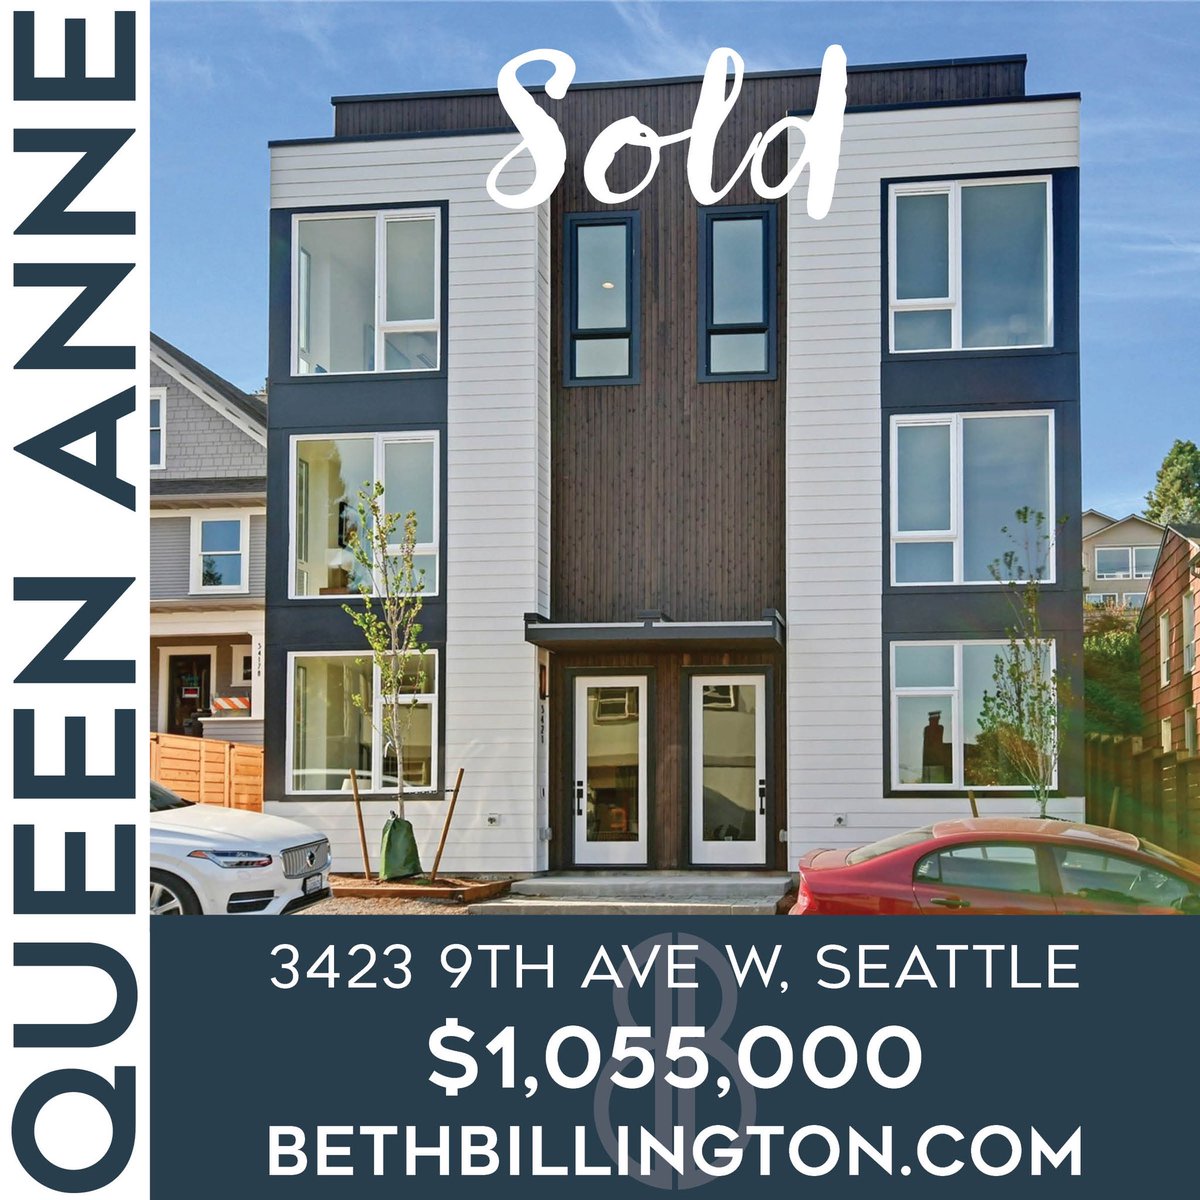 SOLD IN SEATTLE❗️ Proof that perseverance pays off 💪🏼. 
#seattlerealestate #sold #womeninbusiness #womeninrealestate